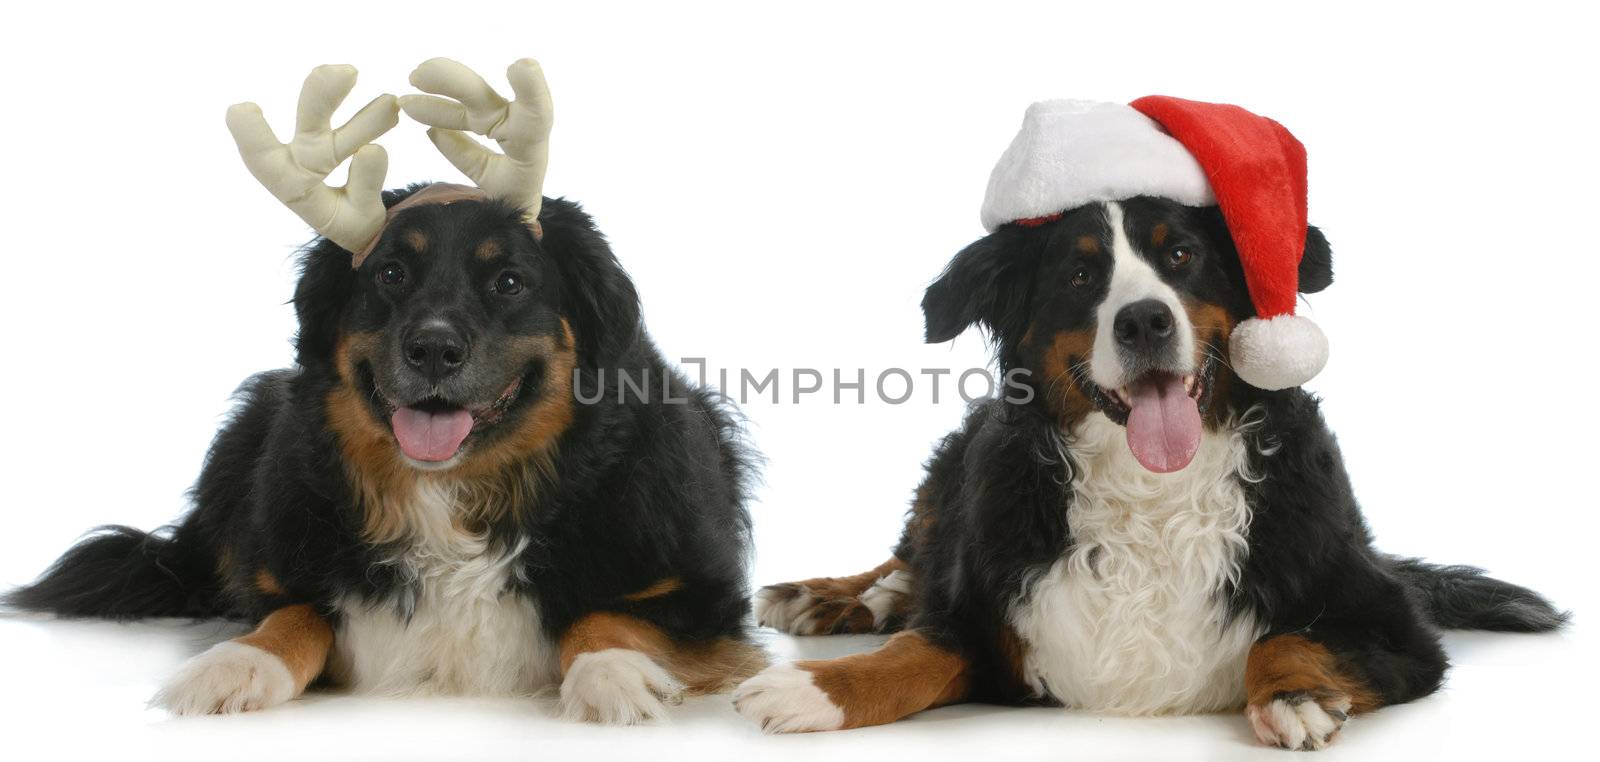 santa and rudolph dogs - bernese mountain dogs dressed up like santa and rudolph looking at viewer isolated on white background